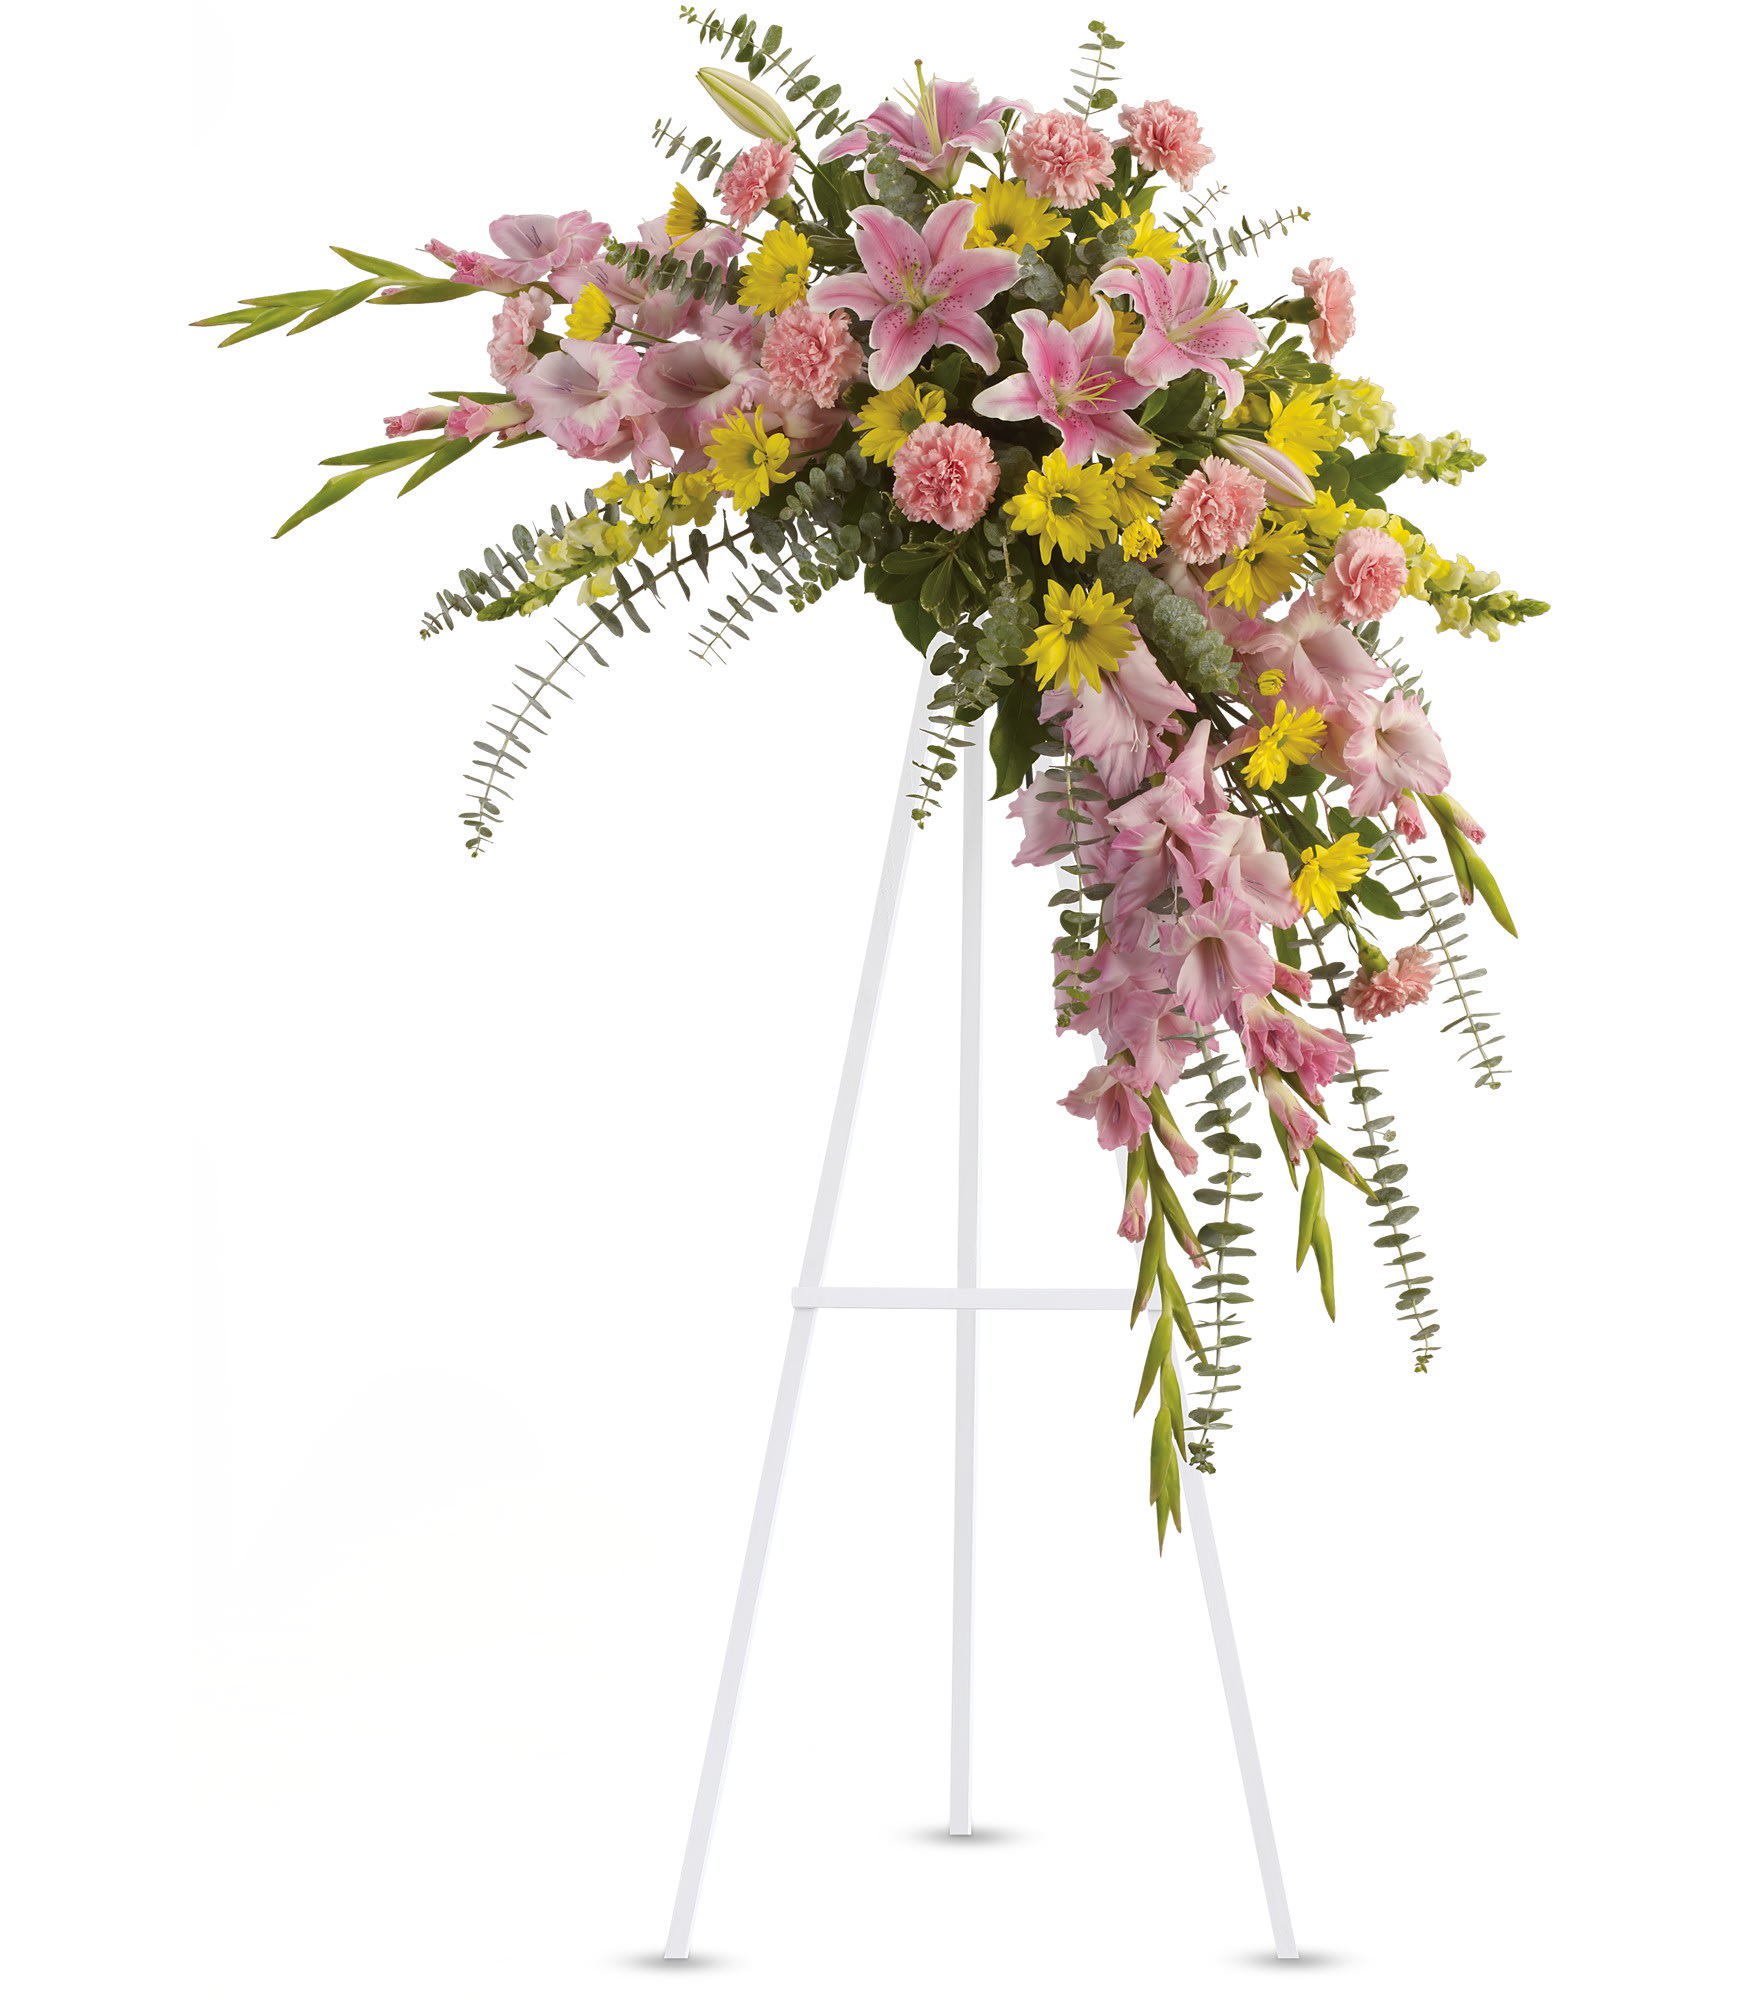 Sweet Solace Spray by Teleflora - Rejoice with this softly dramatic cascade of pink and yellow blooms - lilies, gladioli and chrysanthemums - that has hints of eucalyptus and variegated greens.  